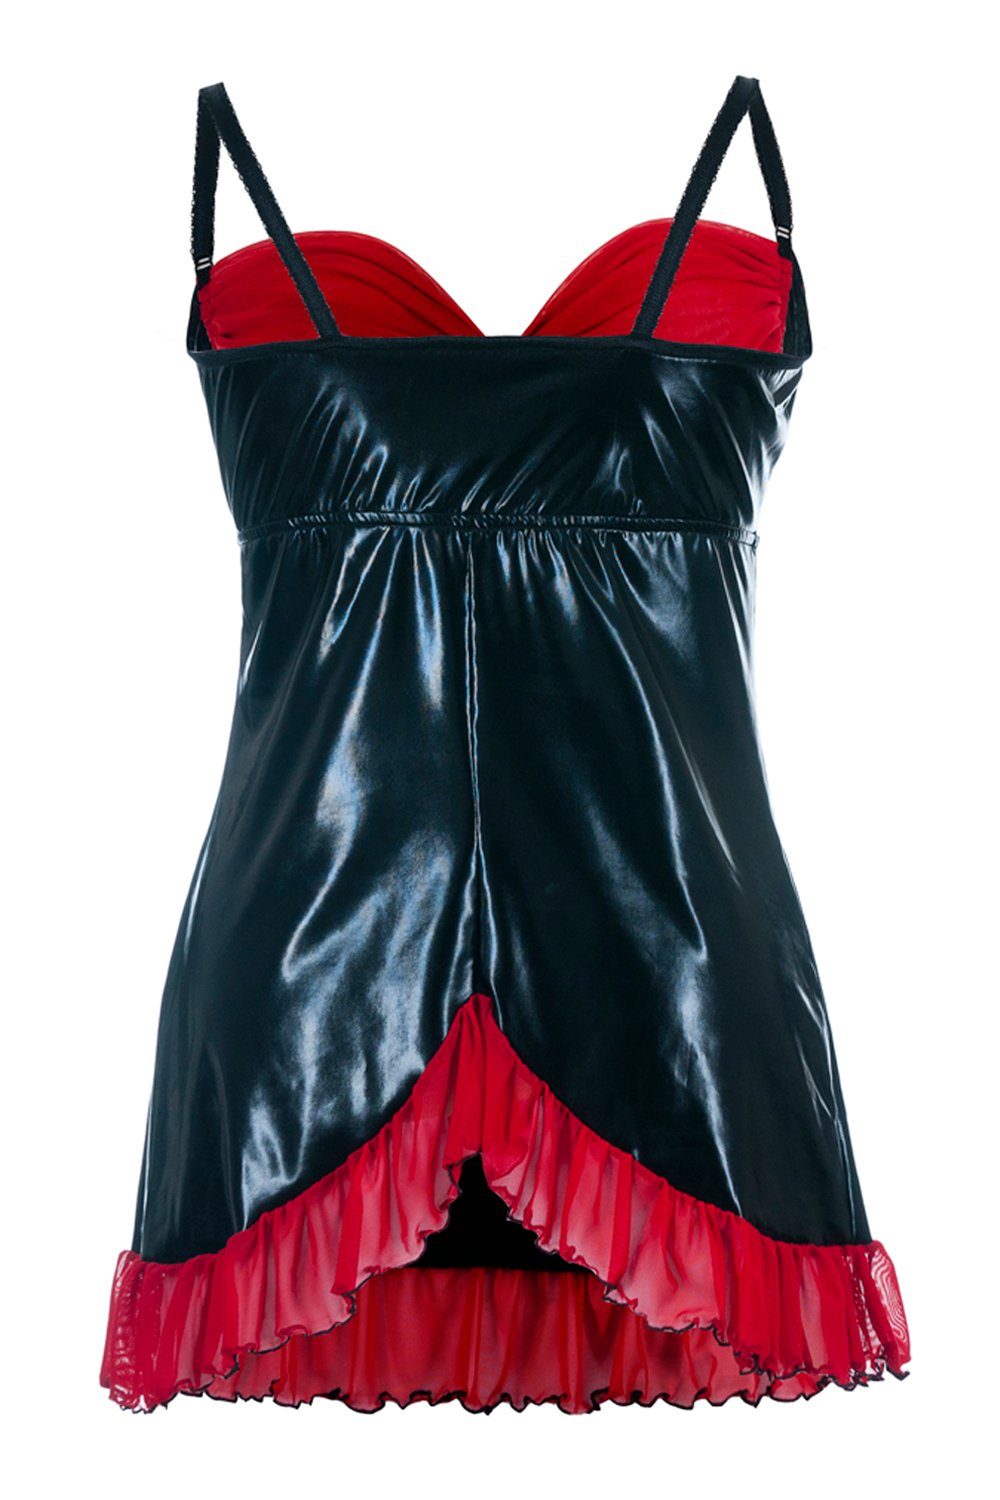 Negligé Wetlook Negligee Chemise schwarz mit Andalea Tüll Made EU rot, in Babydoll,